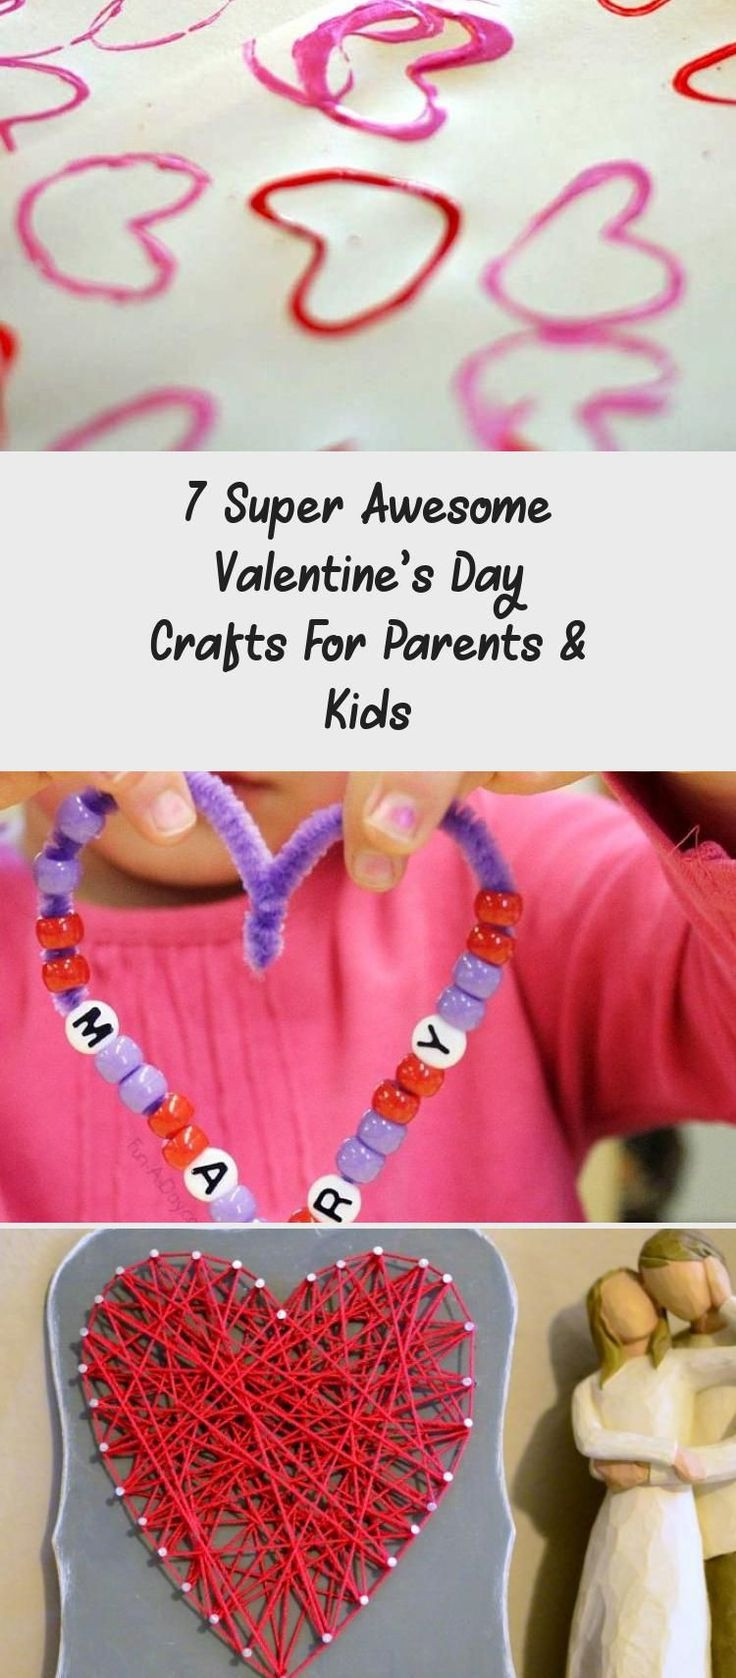 Valentines Day Gift Ideas For Parents
 7 Super Awesome Valentine’s Day Crafts For Parents & Kids